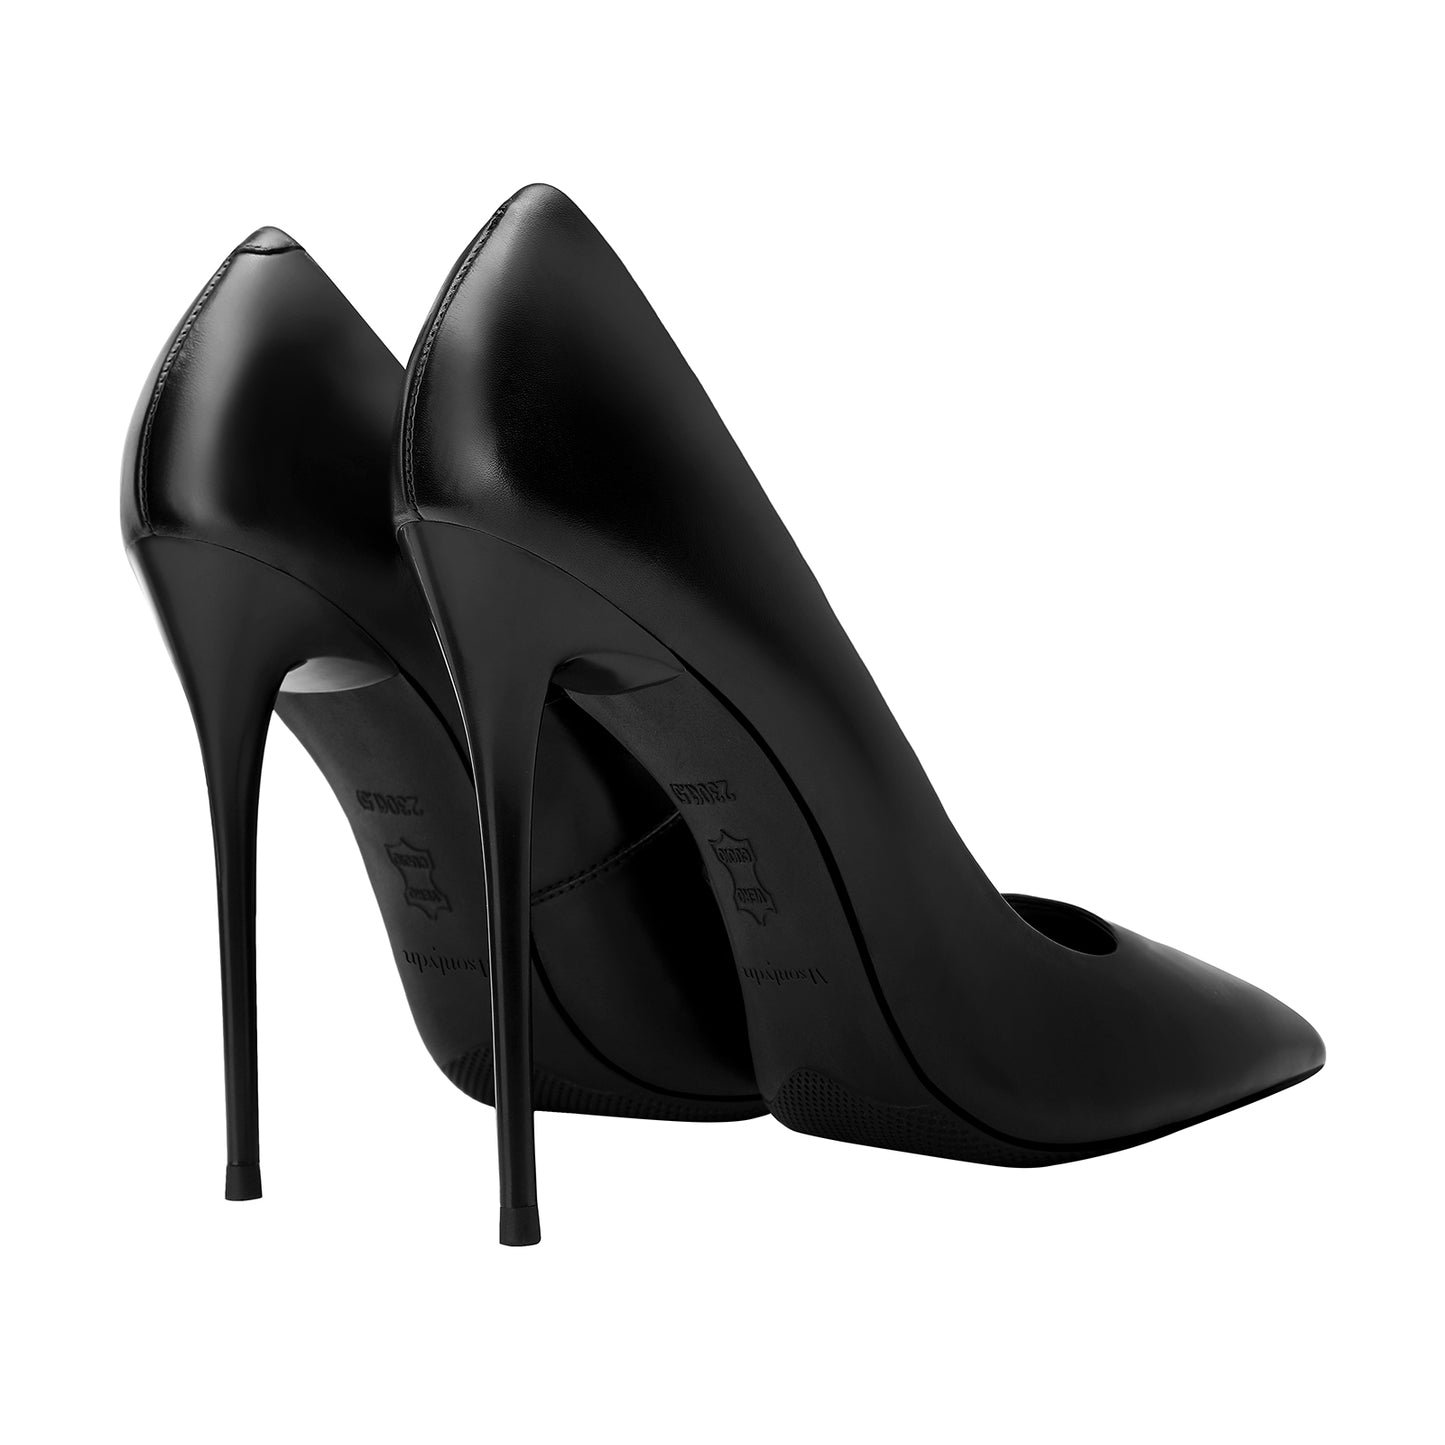 High Heel Pumps-Leather Pointed Toe Slip On Stilletto Shoes